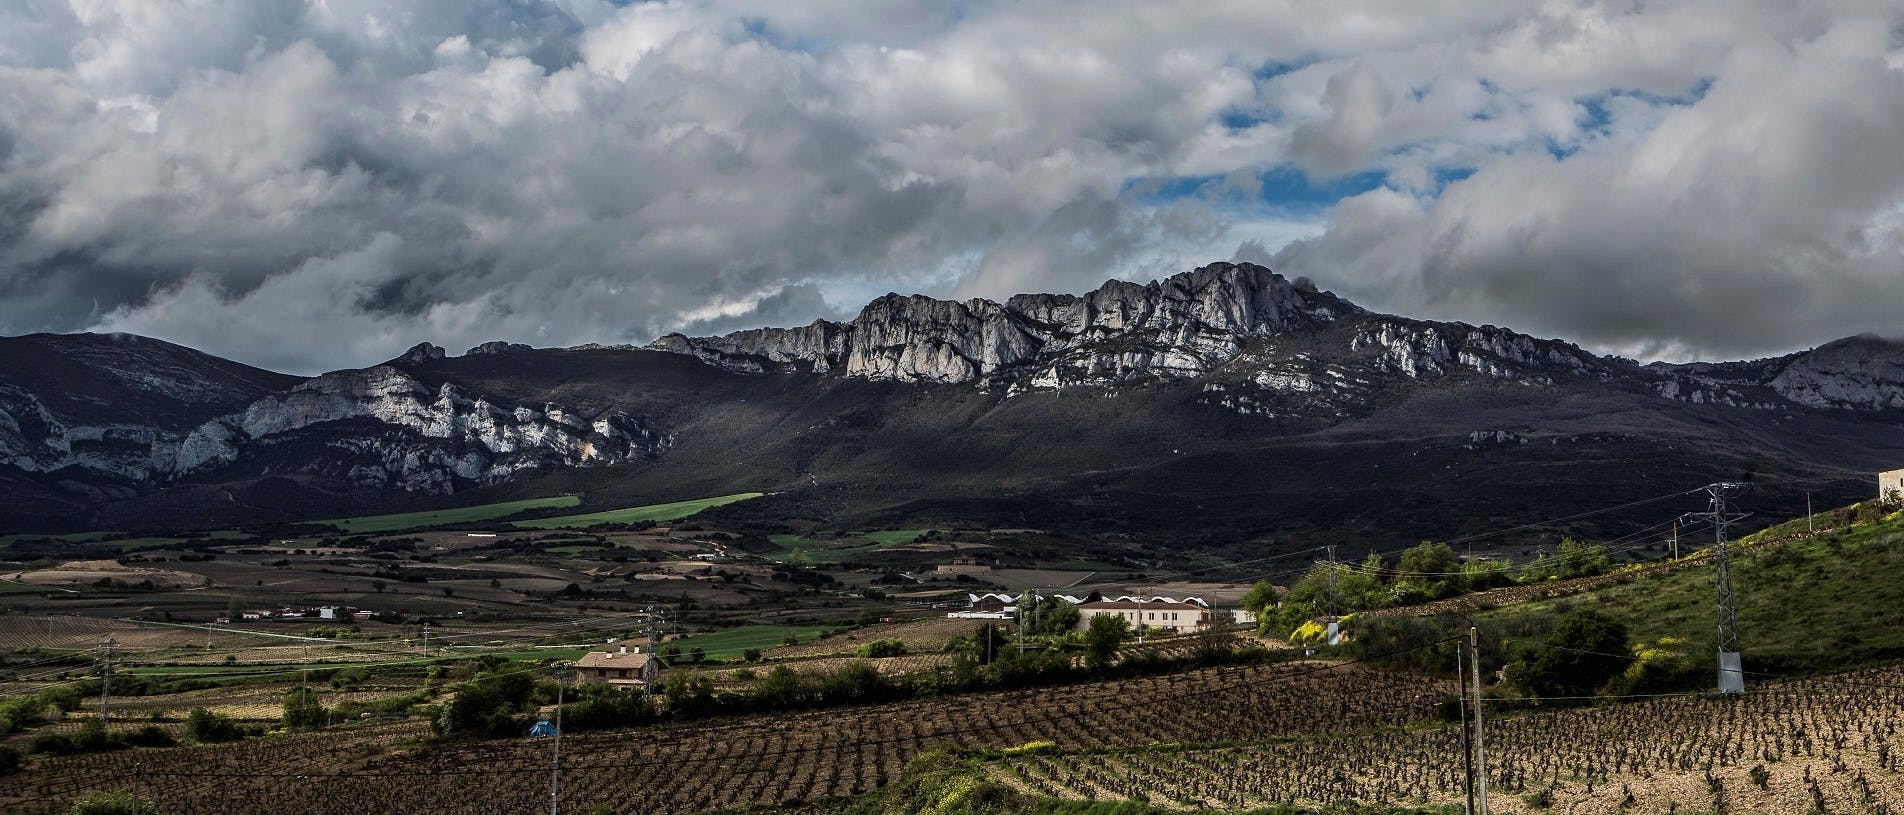 Winery visit in La Rioja with tasting and lunch from Vitoria